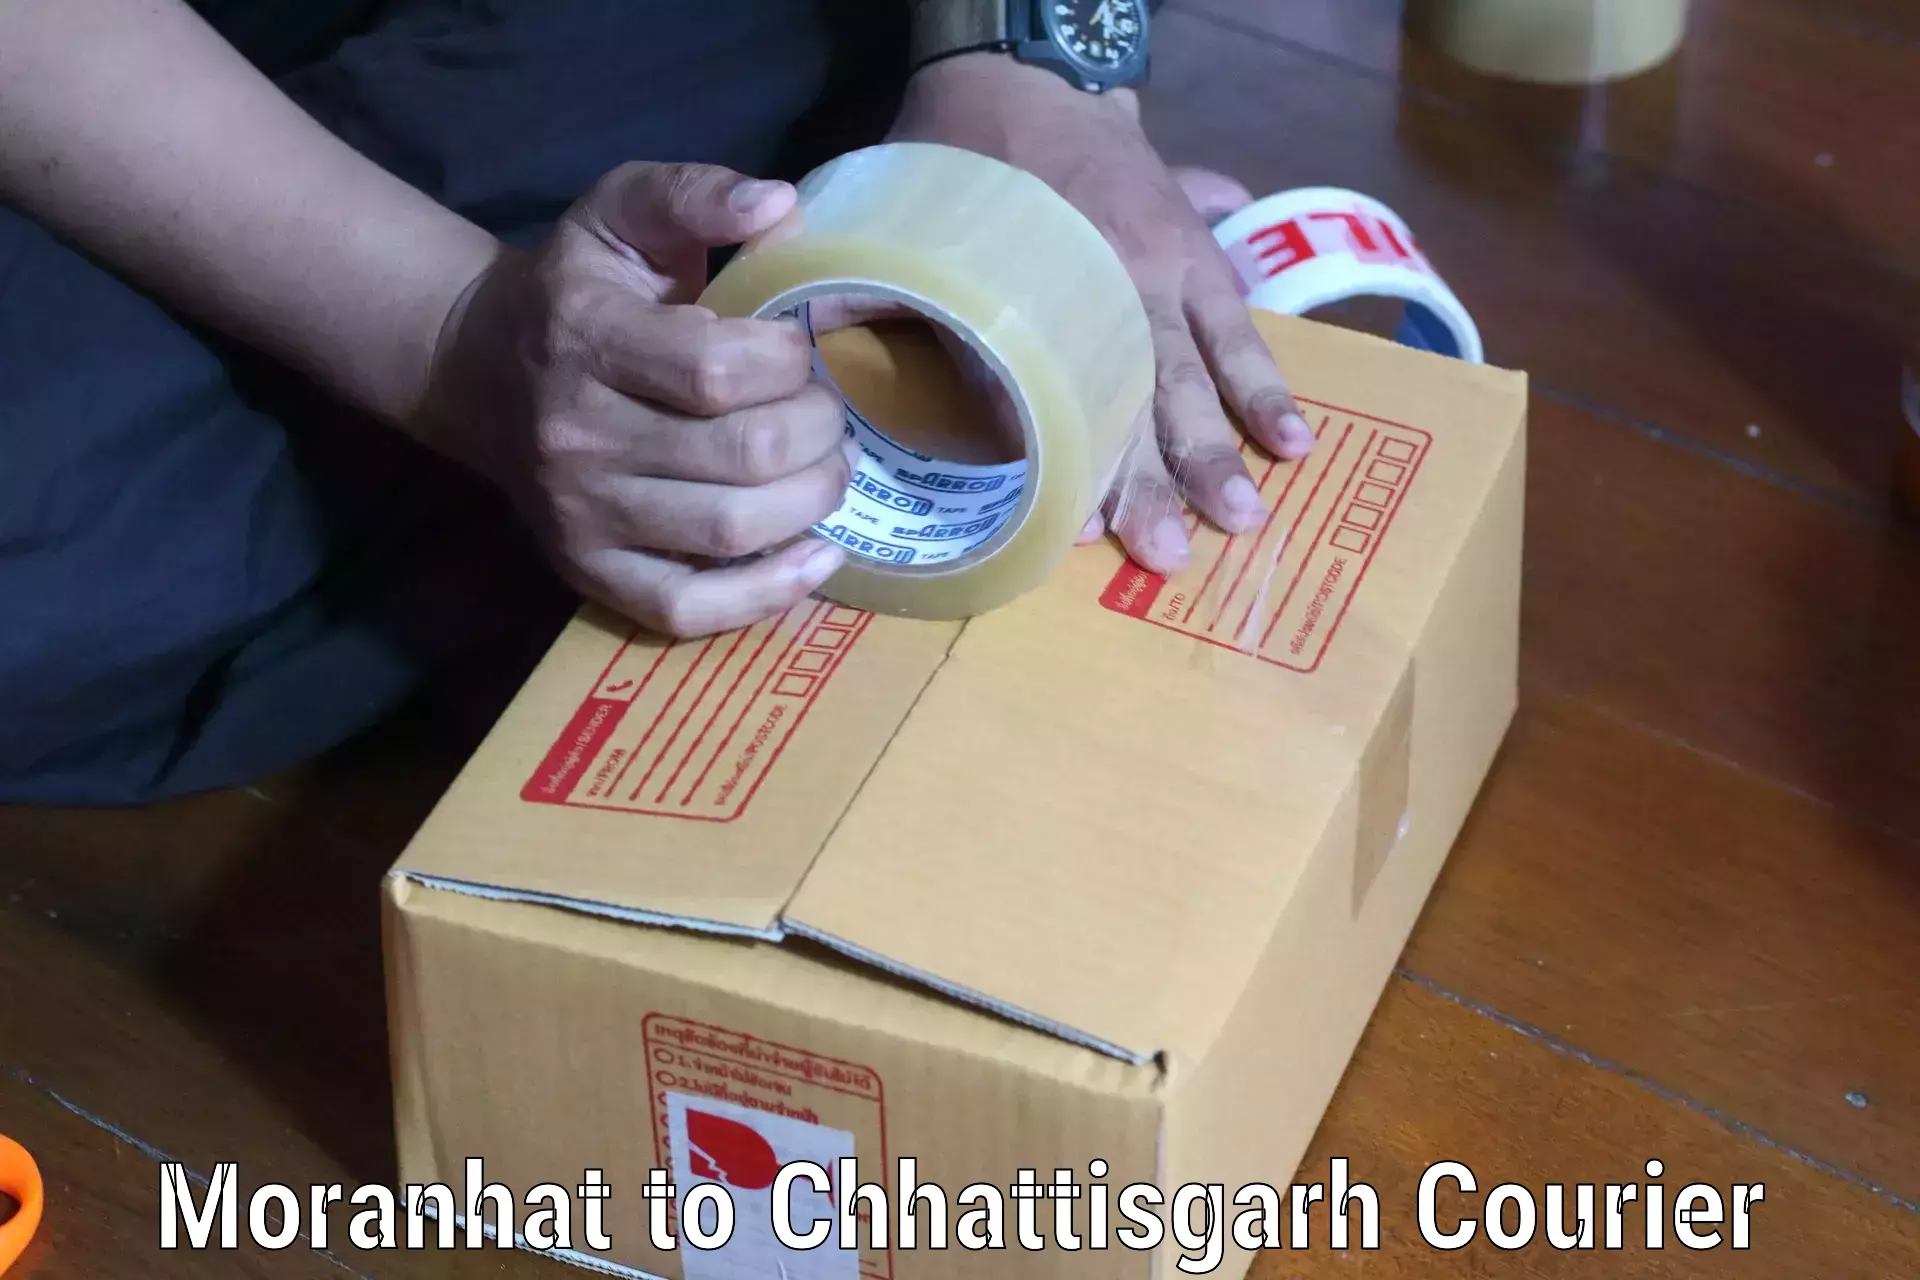 Courier service innovation Moranhat to Dhamtari